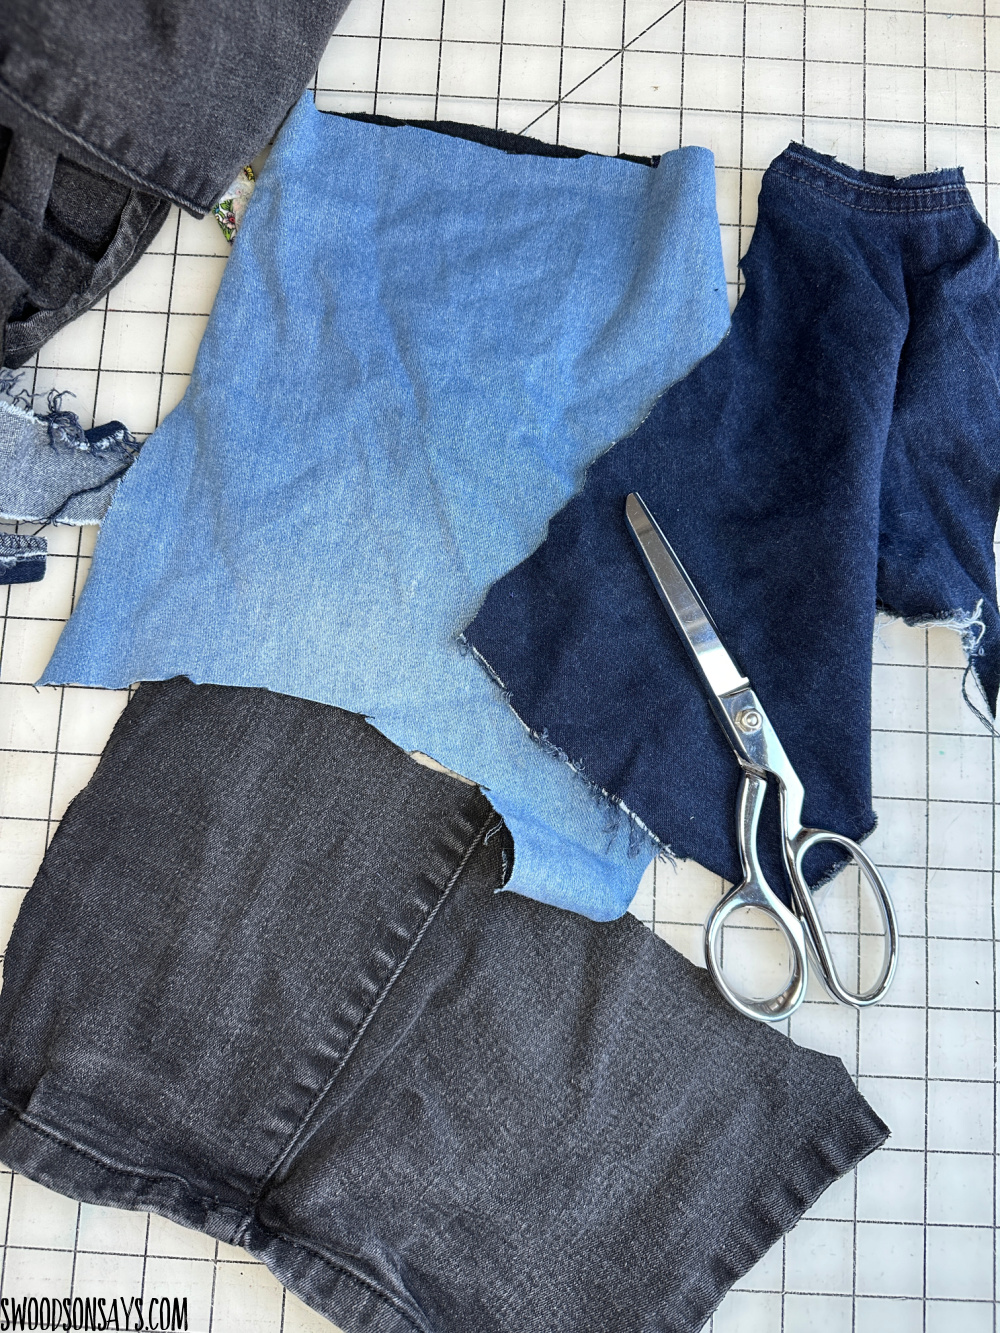 upcycle denim sewing ideas